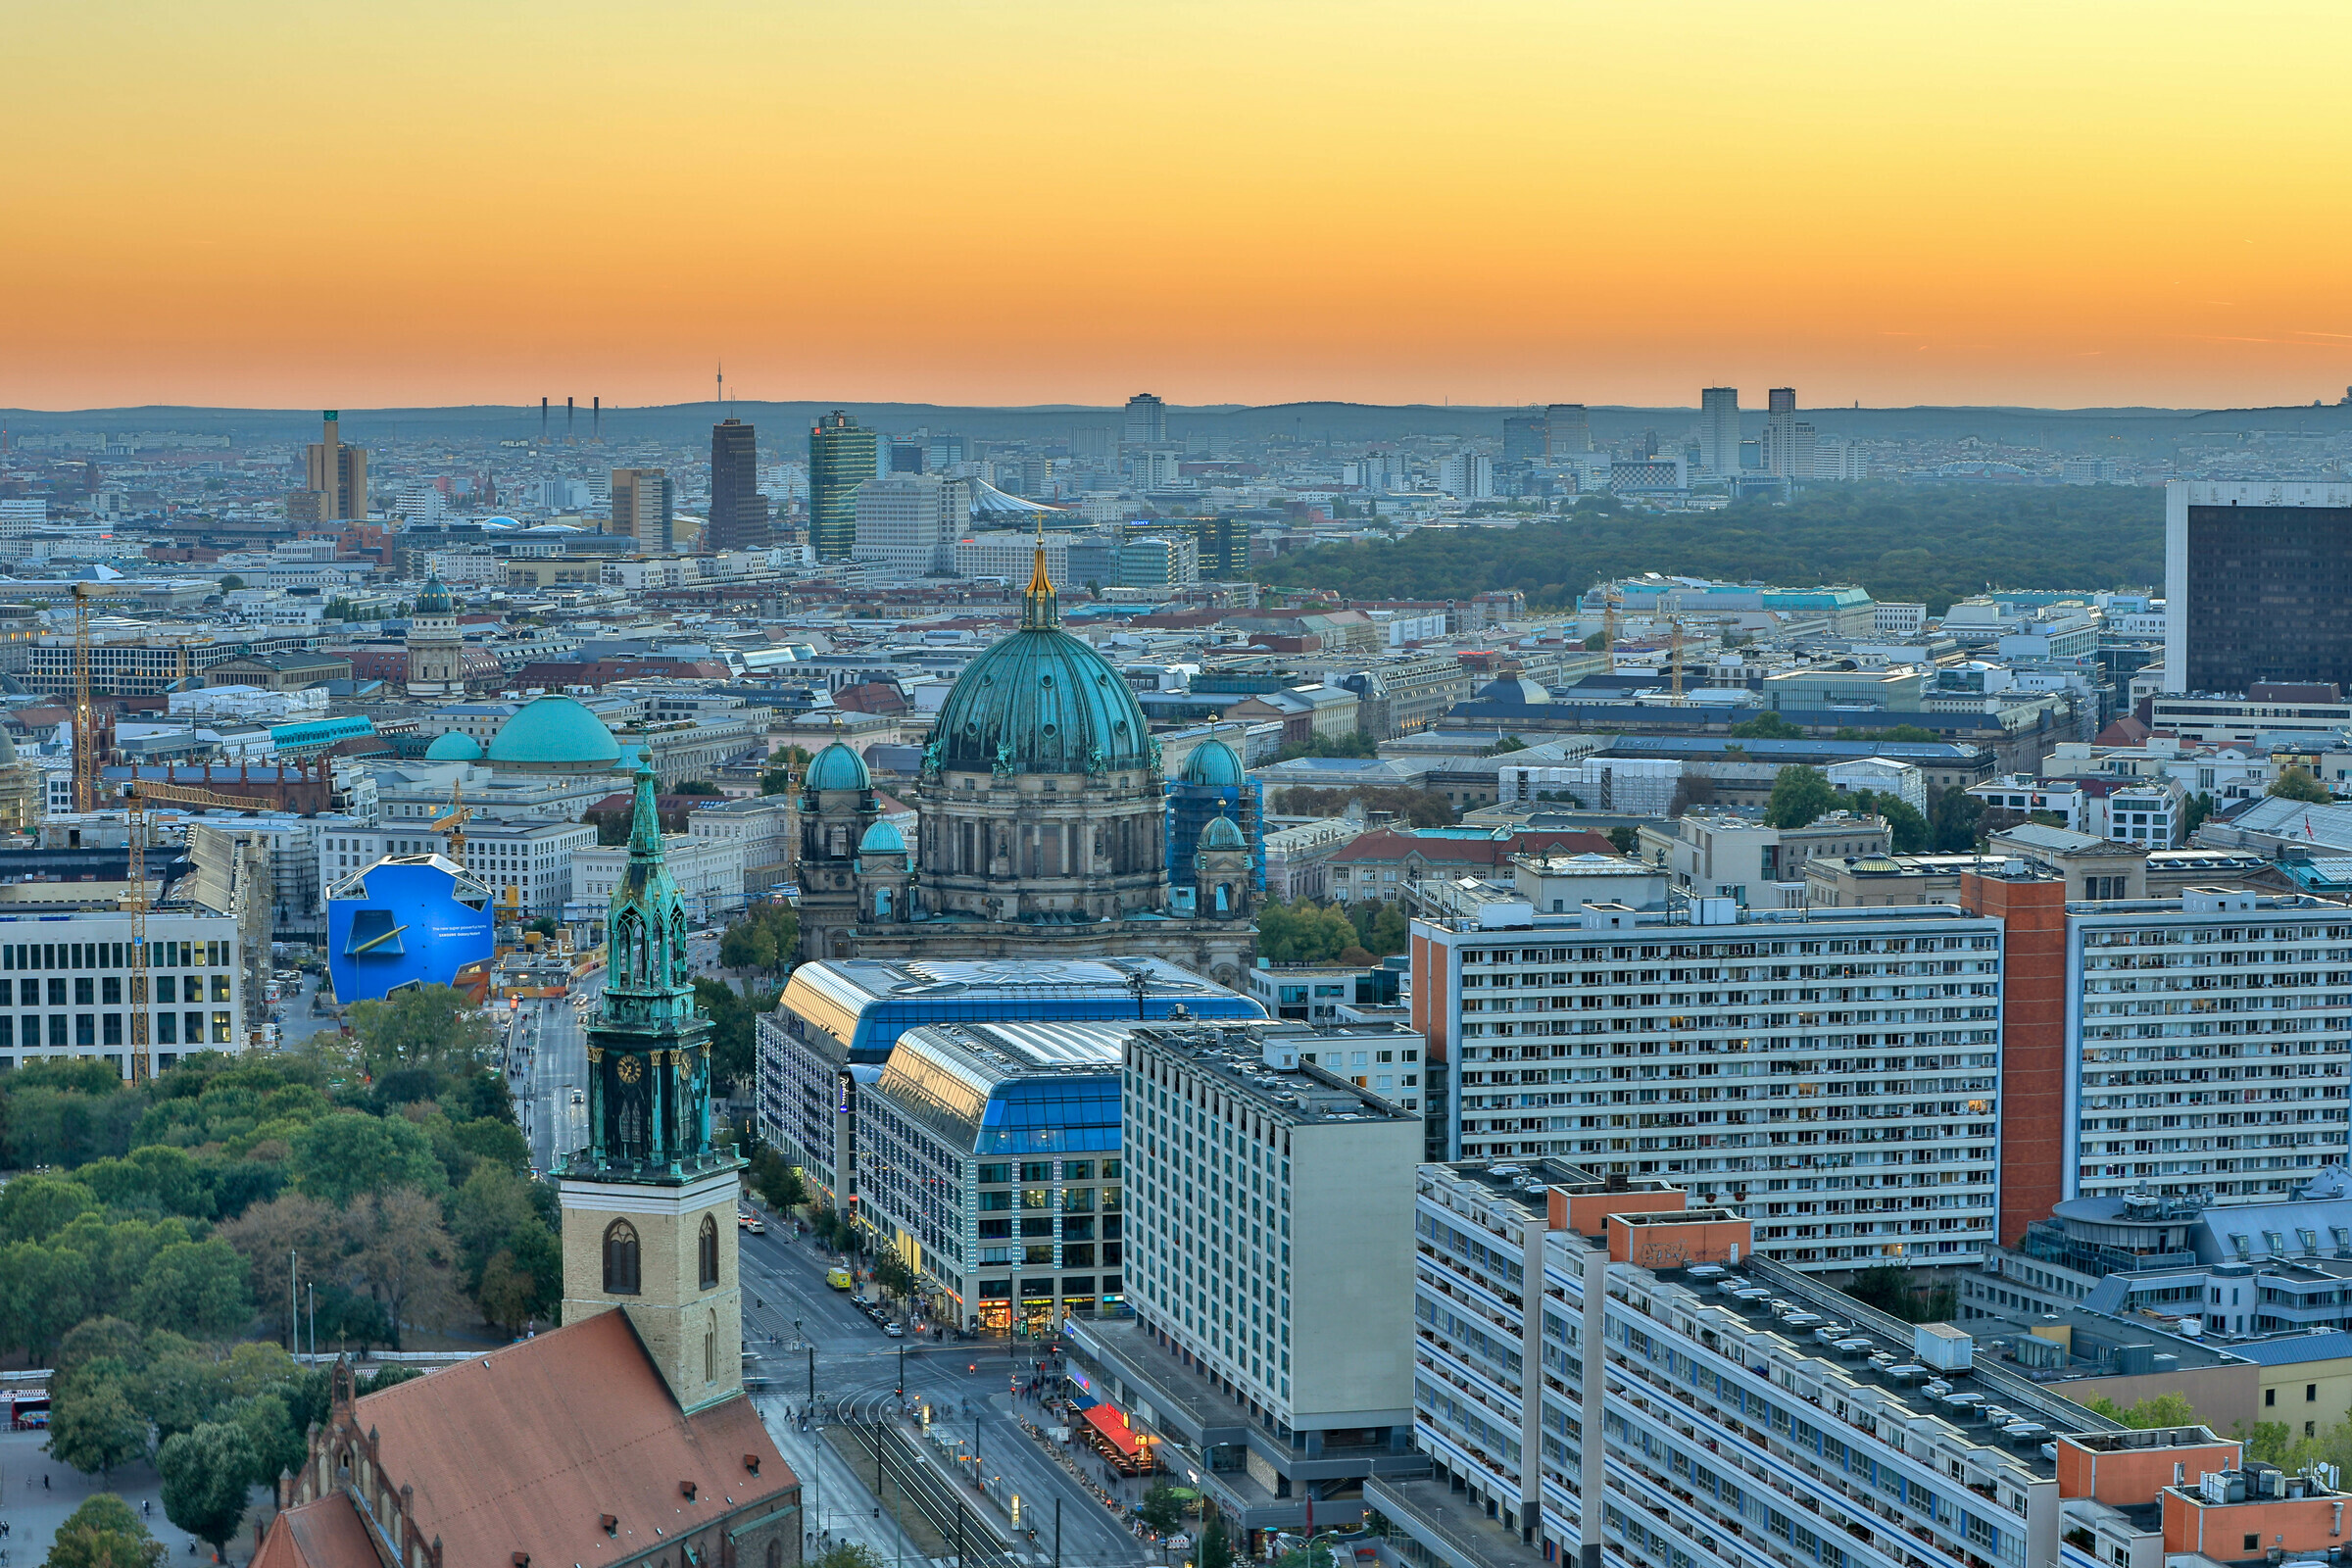 Berlin — the city and capital of Germany